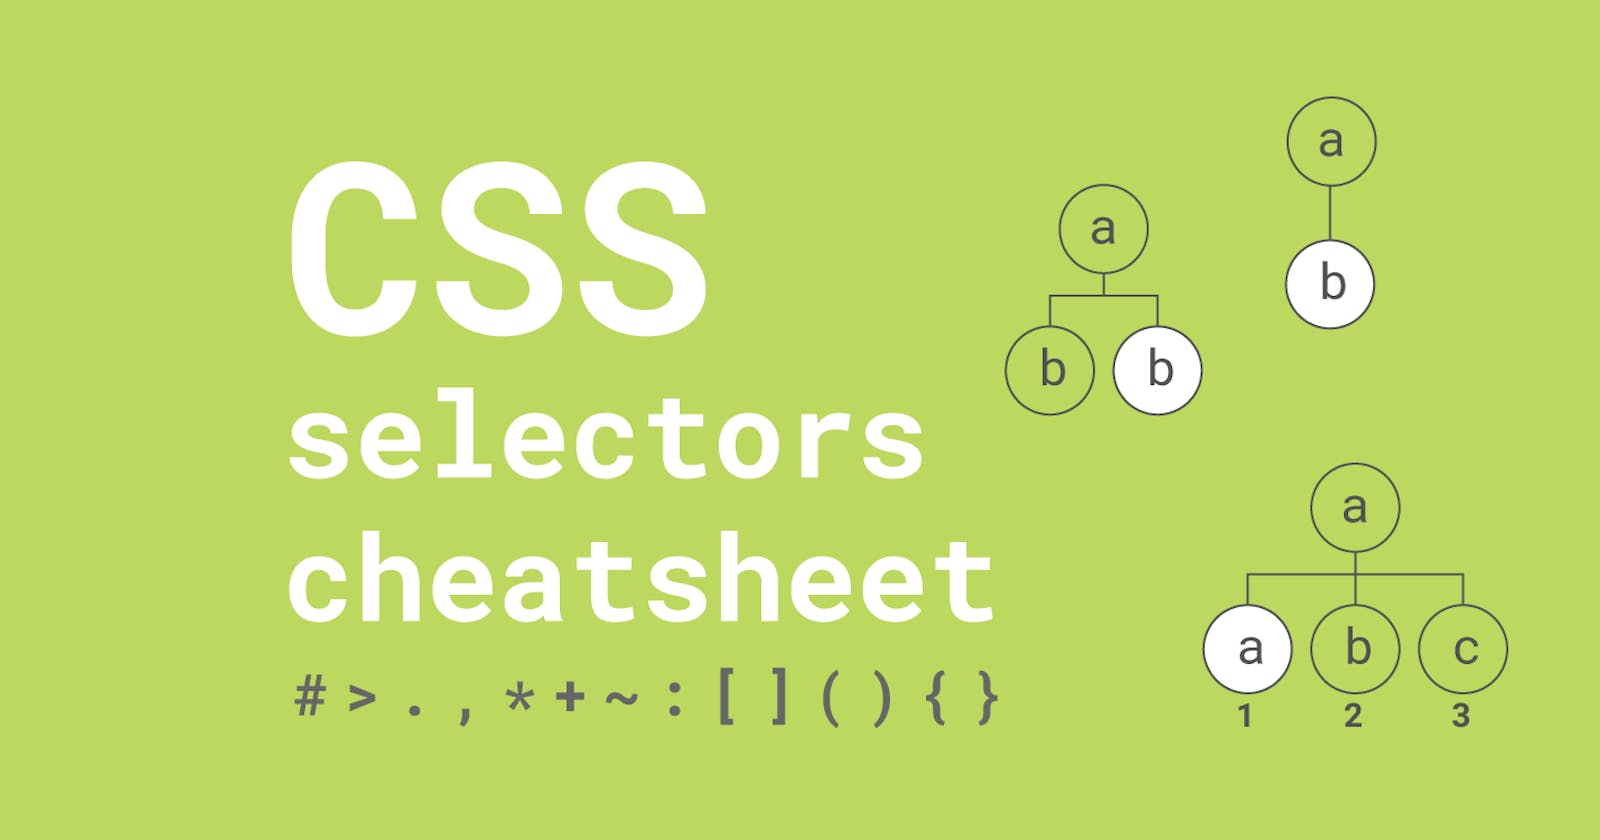 CSS Selector Cheat Sheet: Top selectors for front-end development